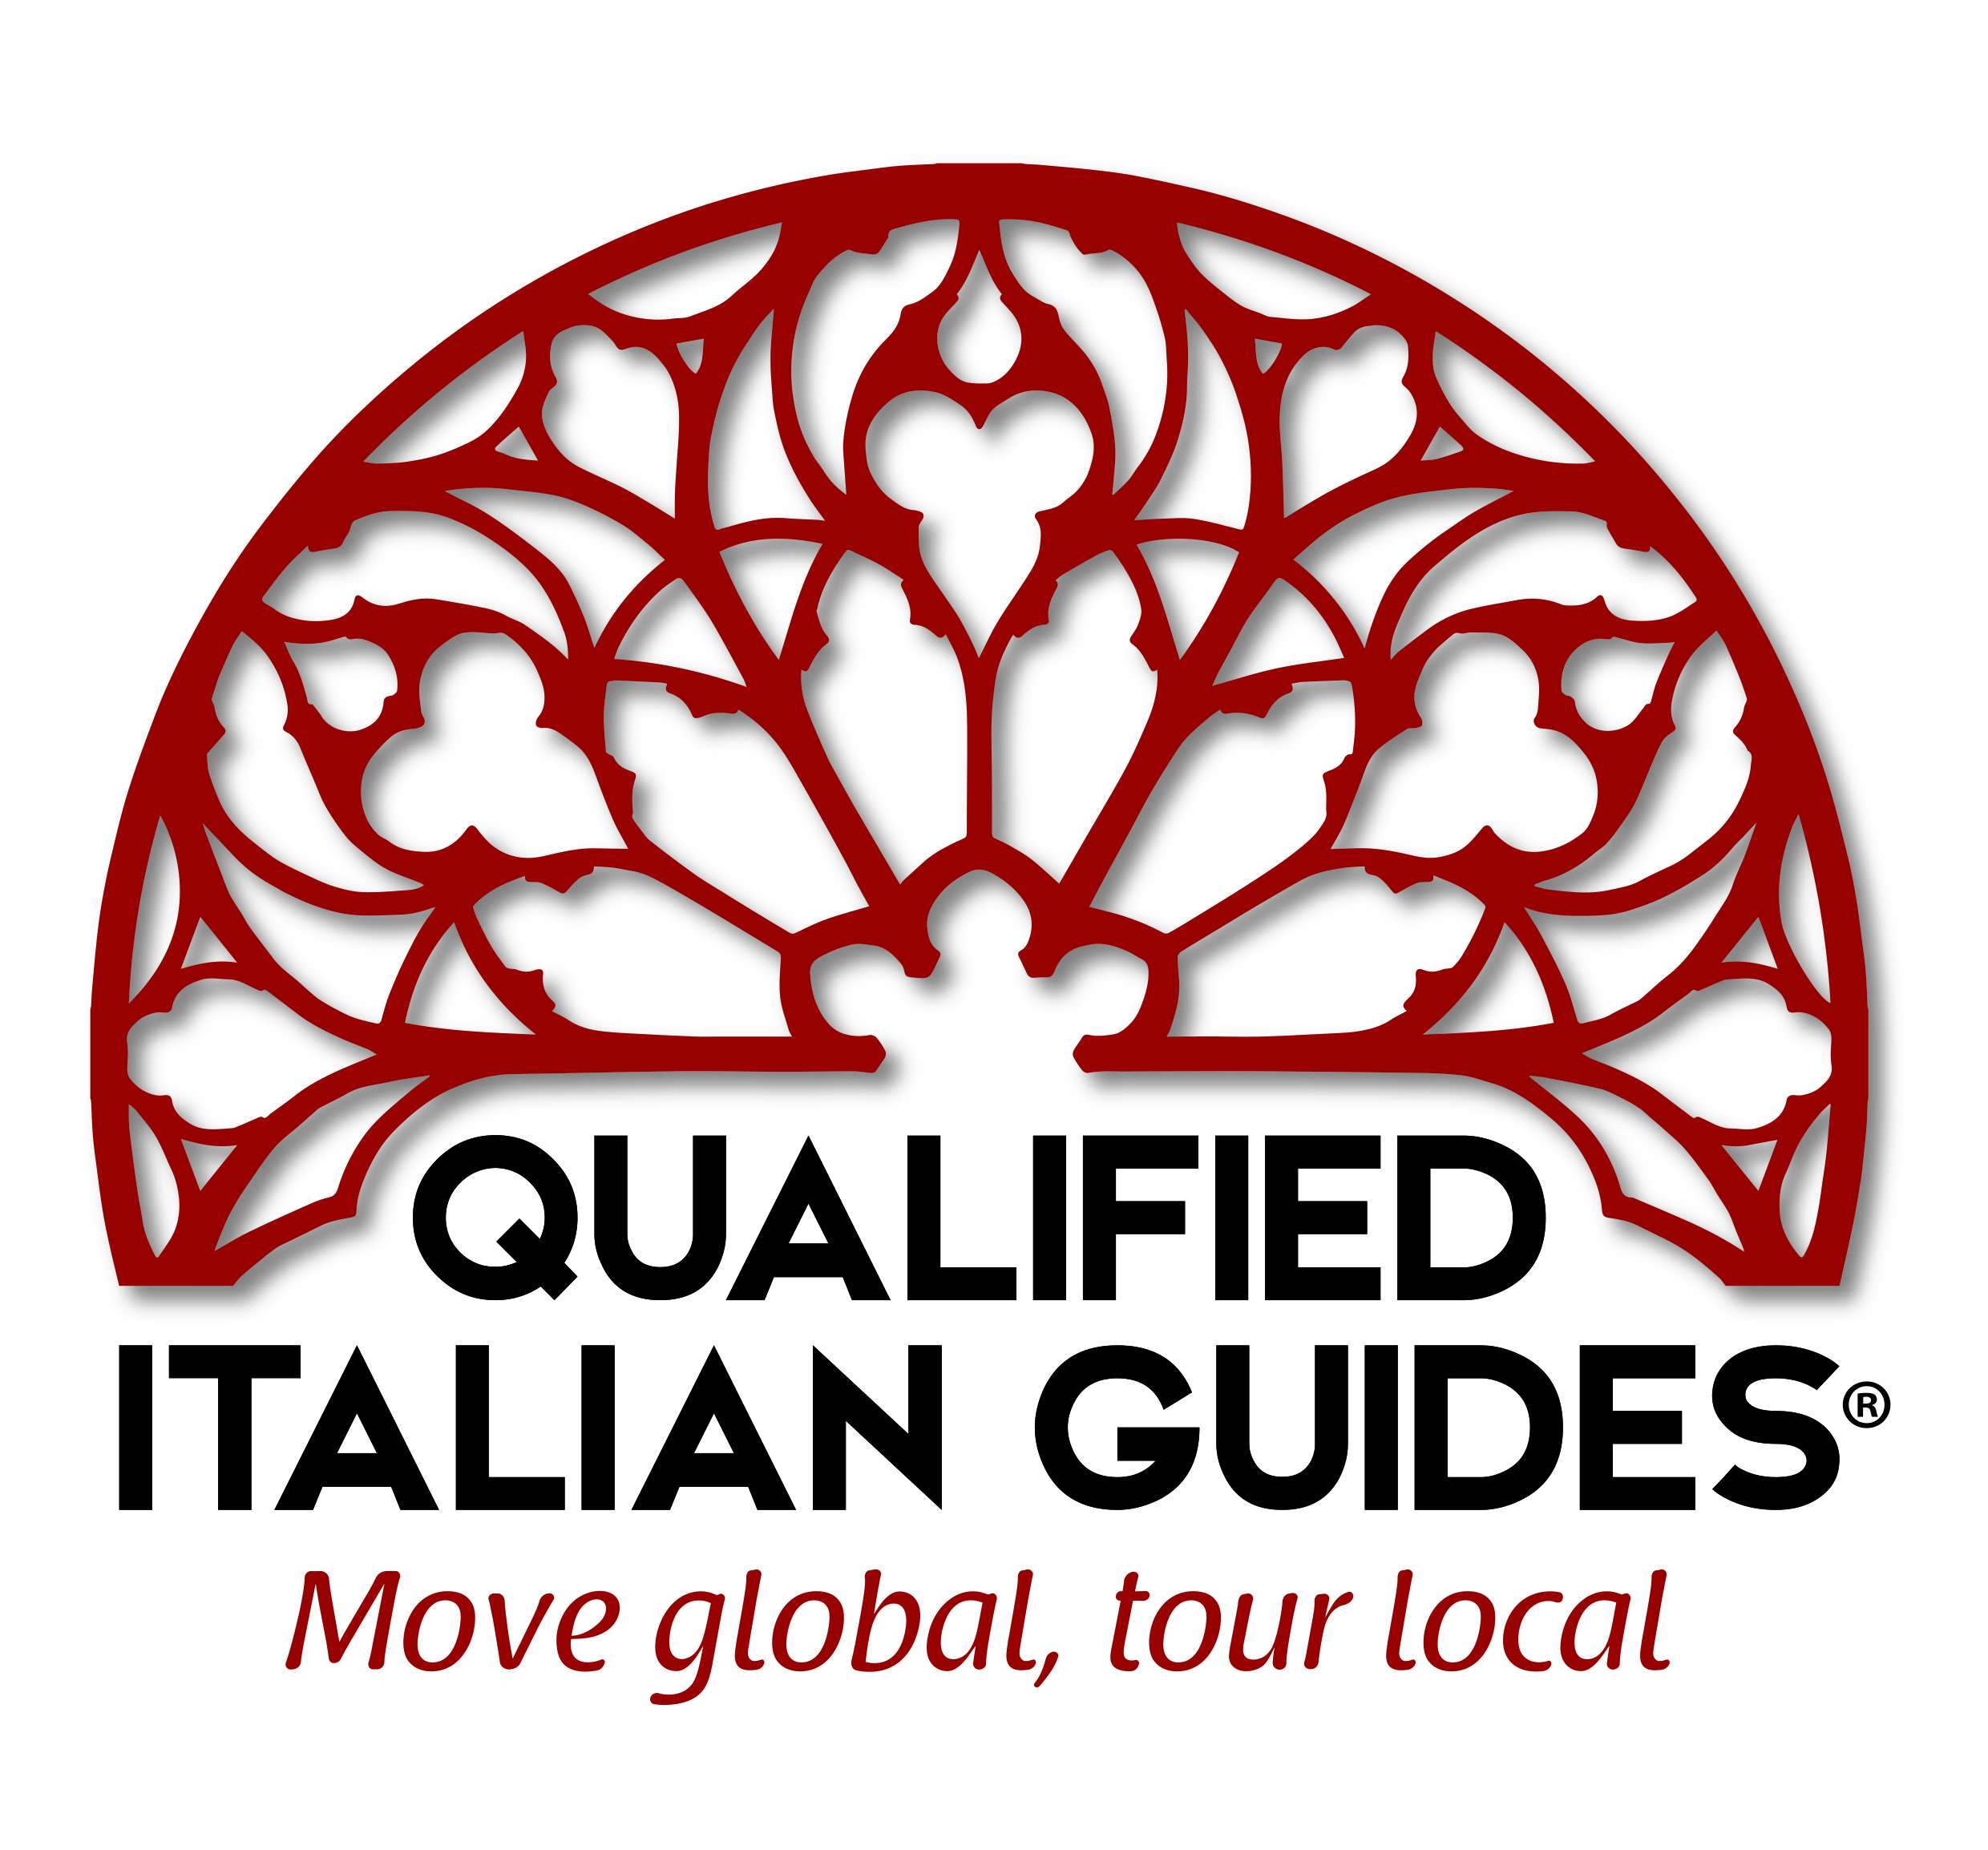 QUALIFIED ITALIAN GUIDES